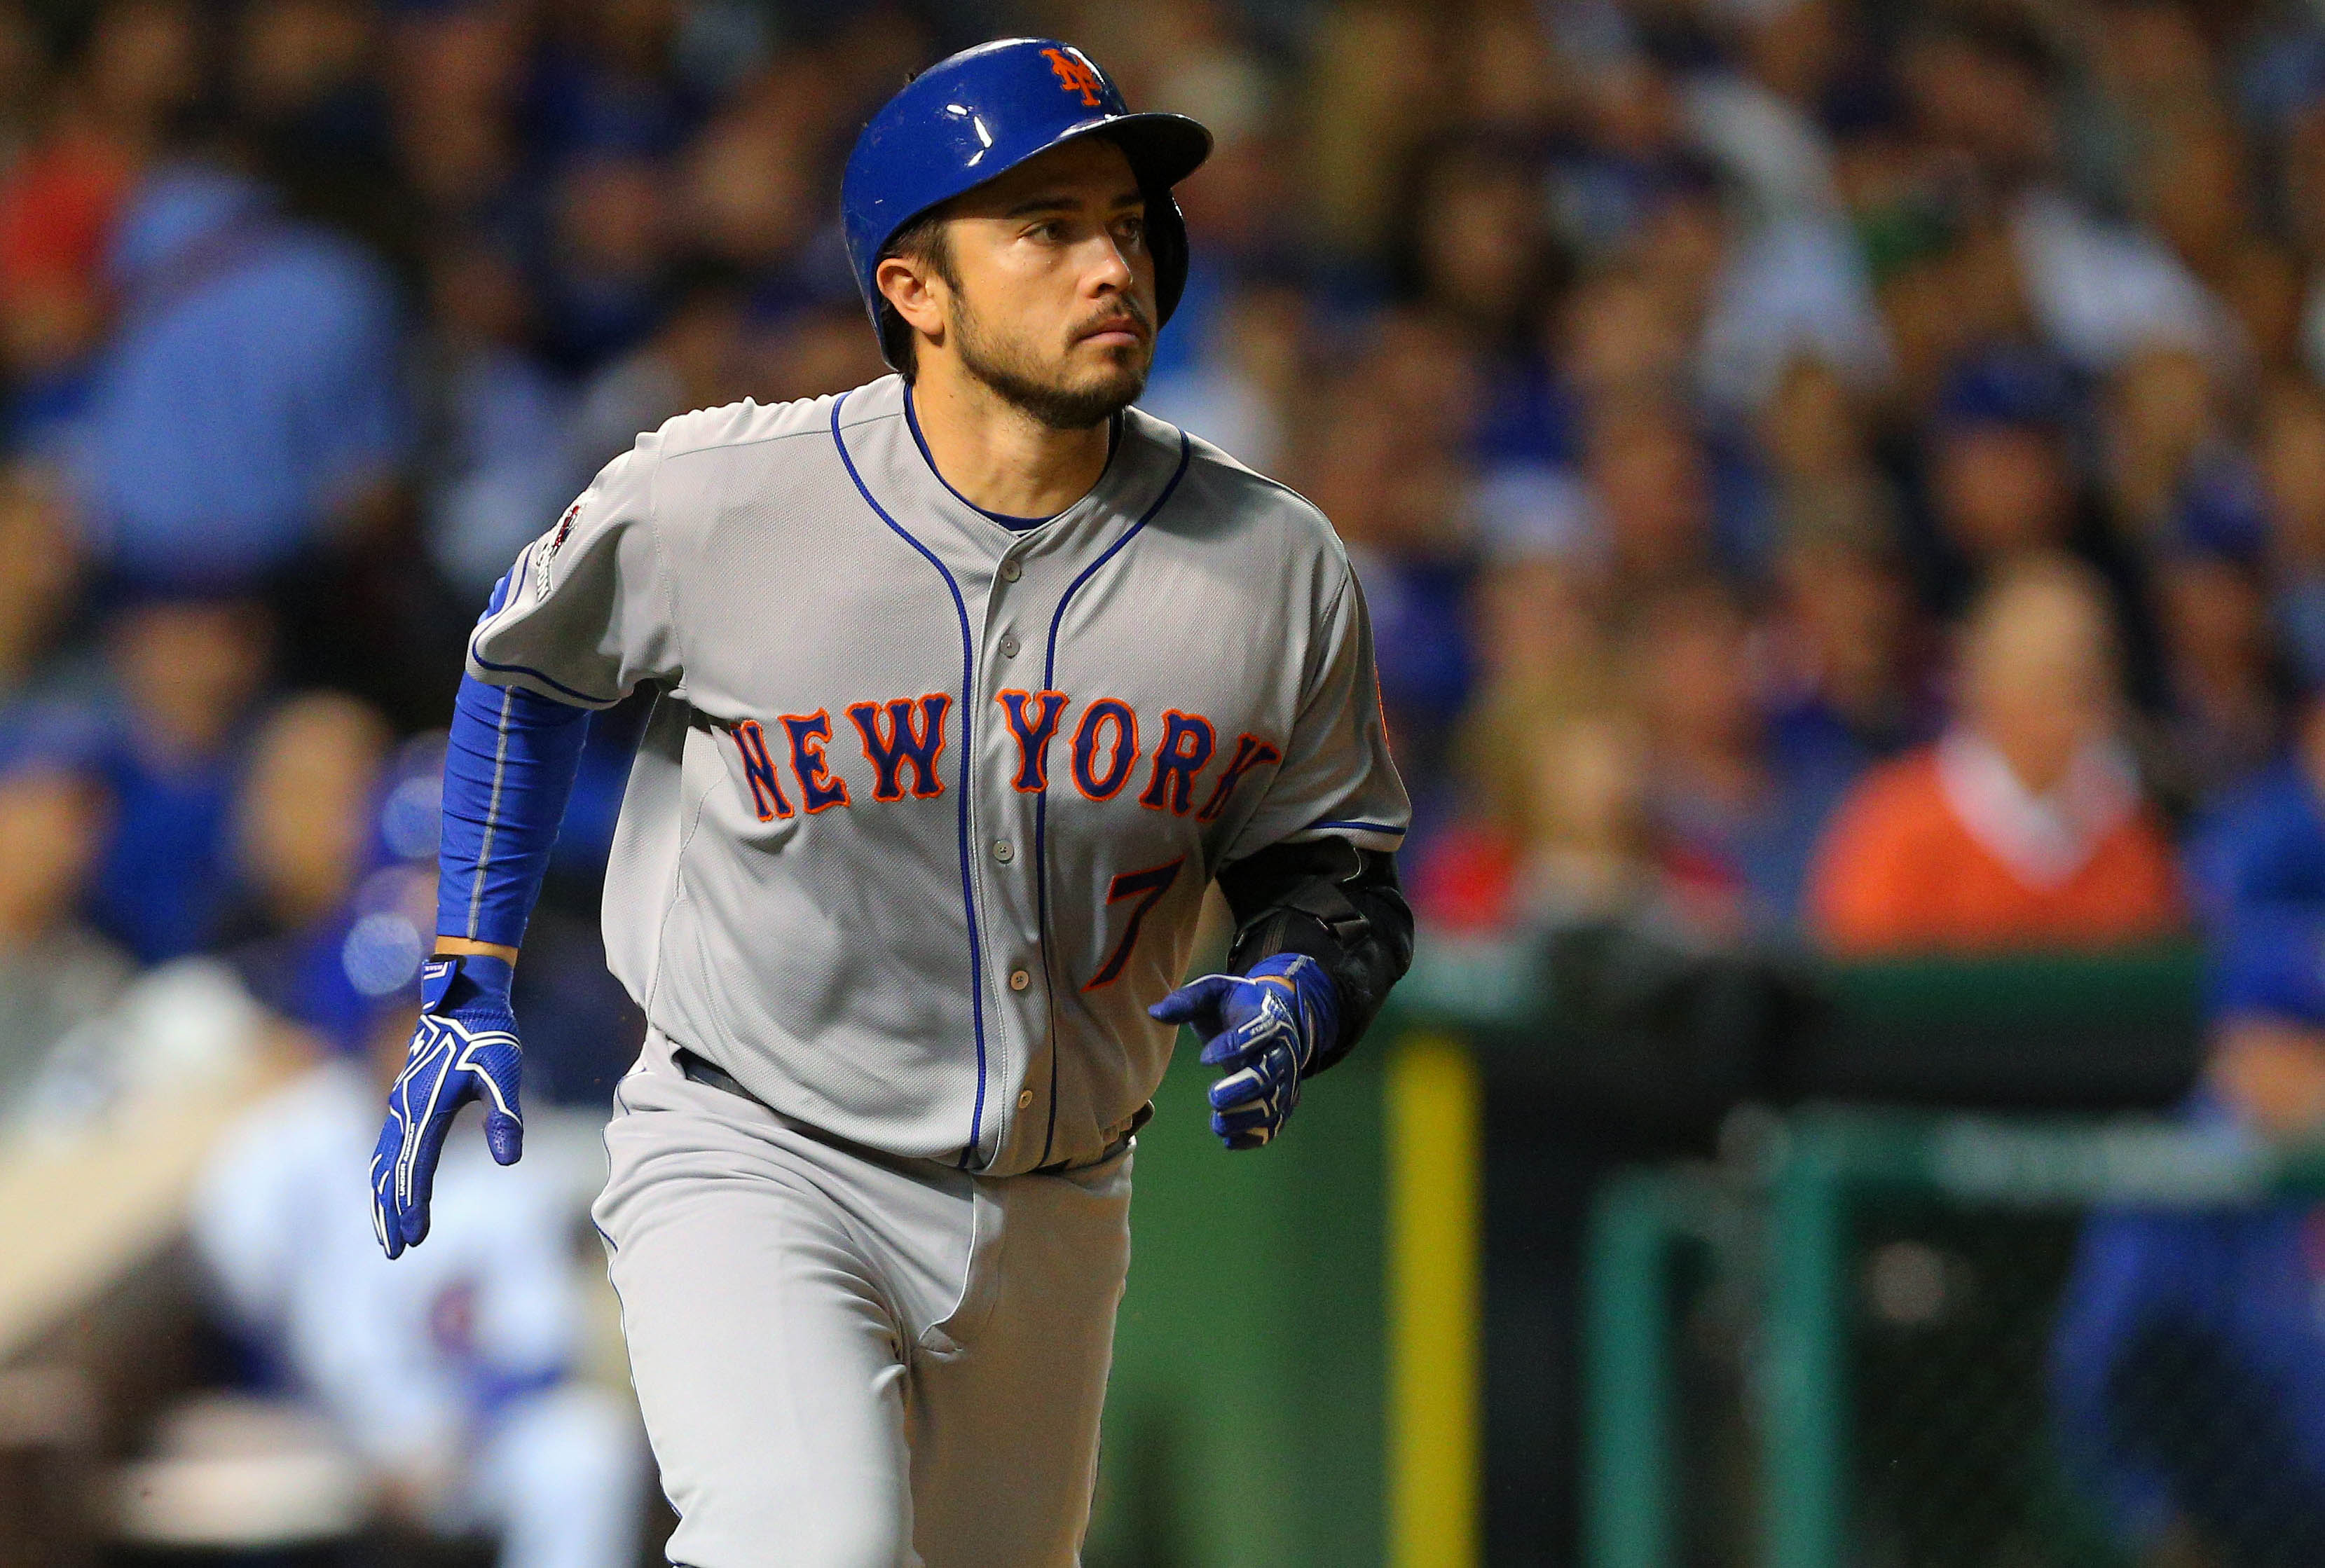 New York Mets catcher Travis d'Arnaud hits a solo home run in Game 4 of the NLCS. (Photo: Dennis Wierzbicki, USA TODAY Sports)